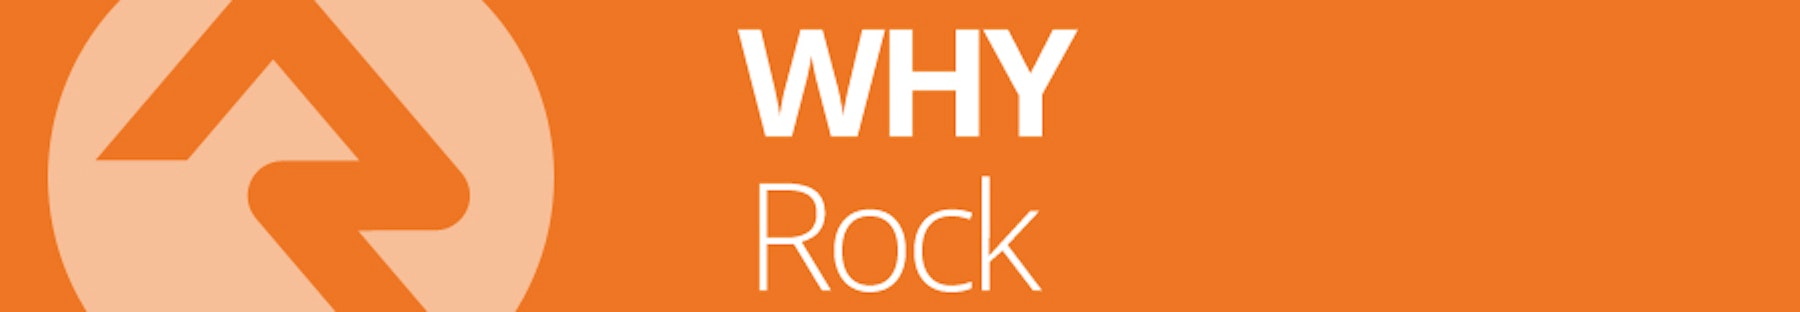 Why Rock?